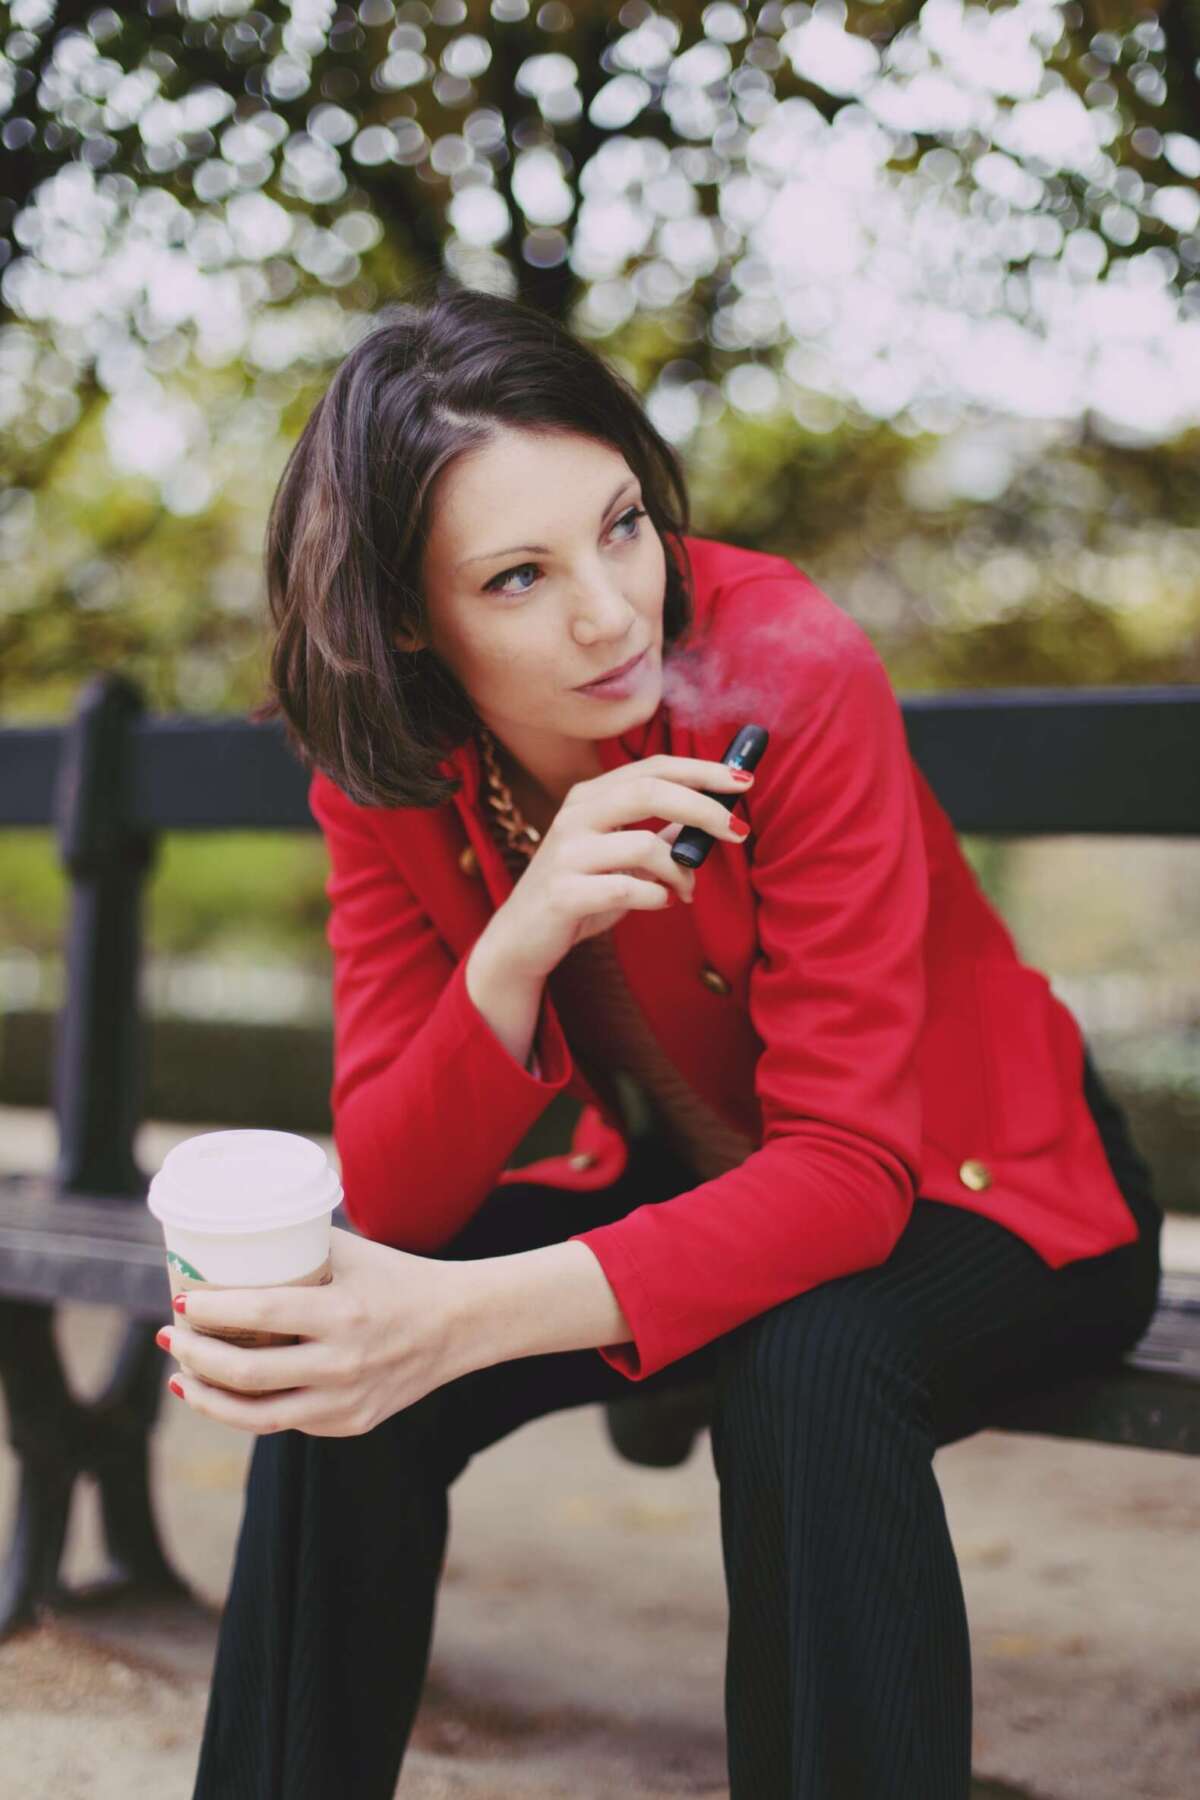 woman vaping on a bench drinking coffee